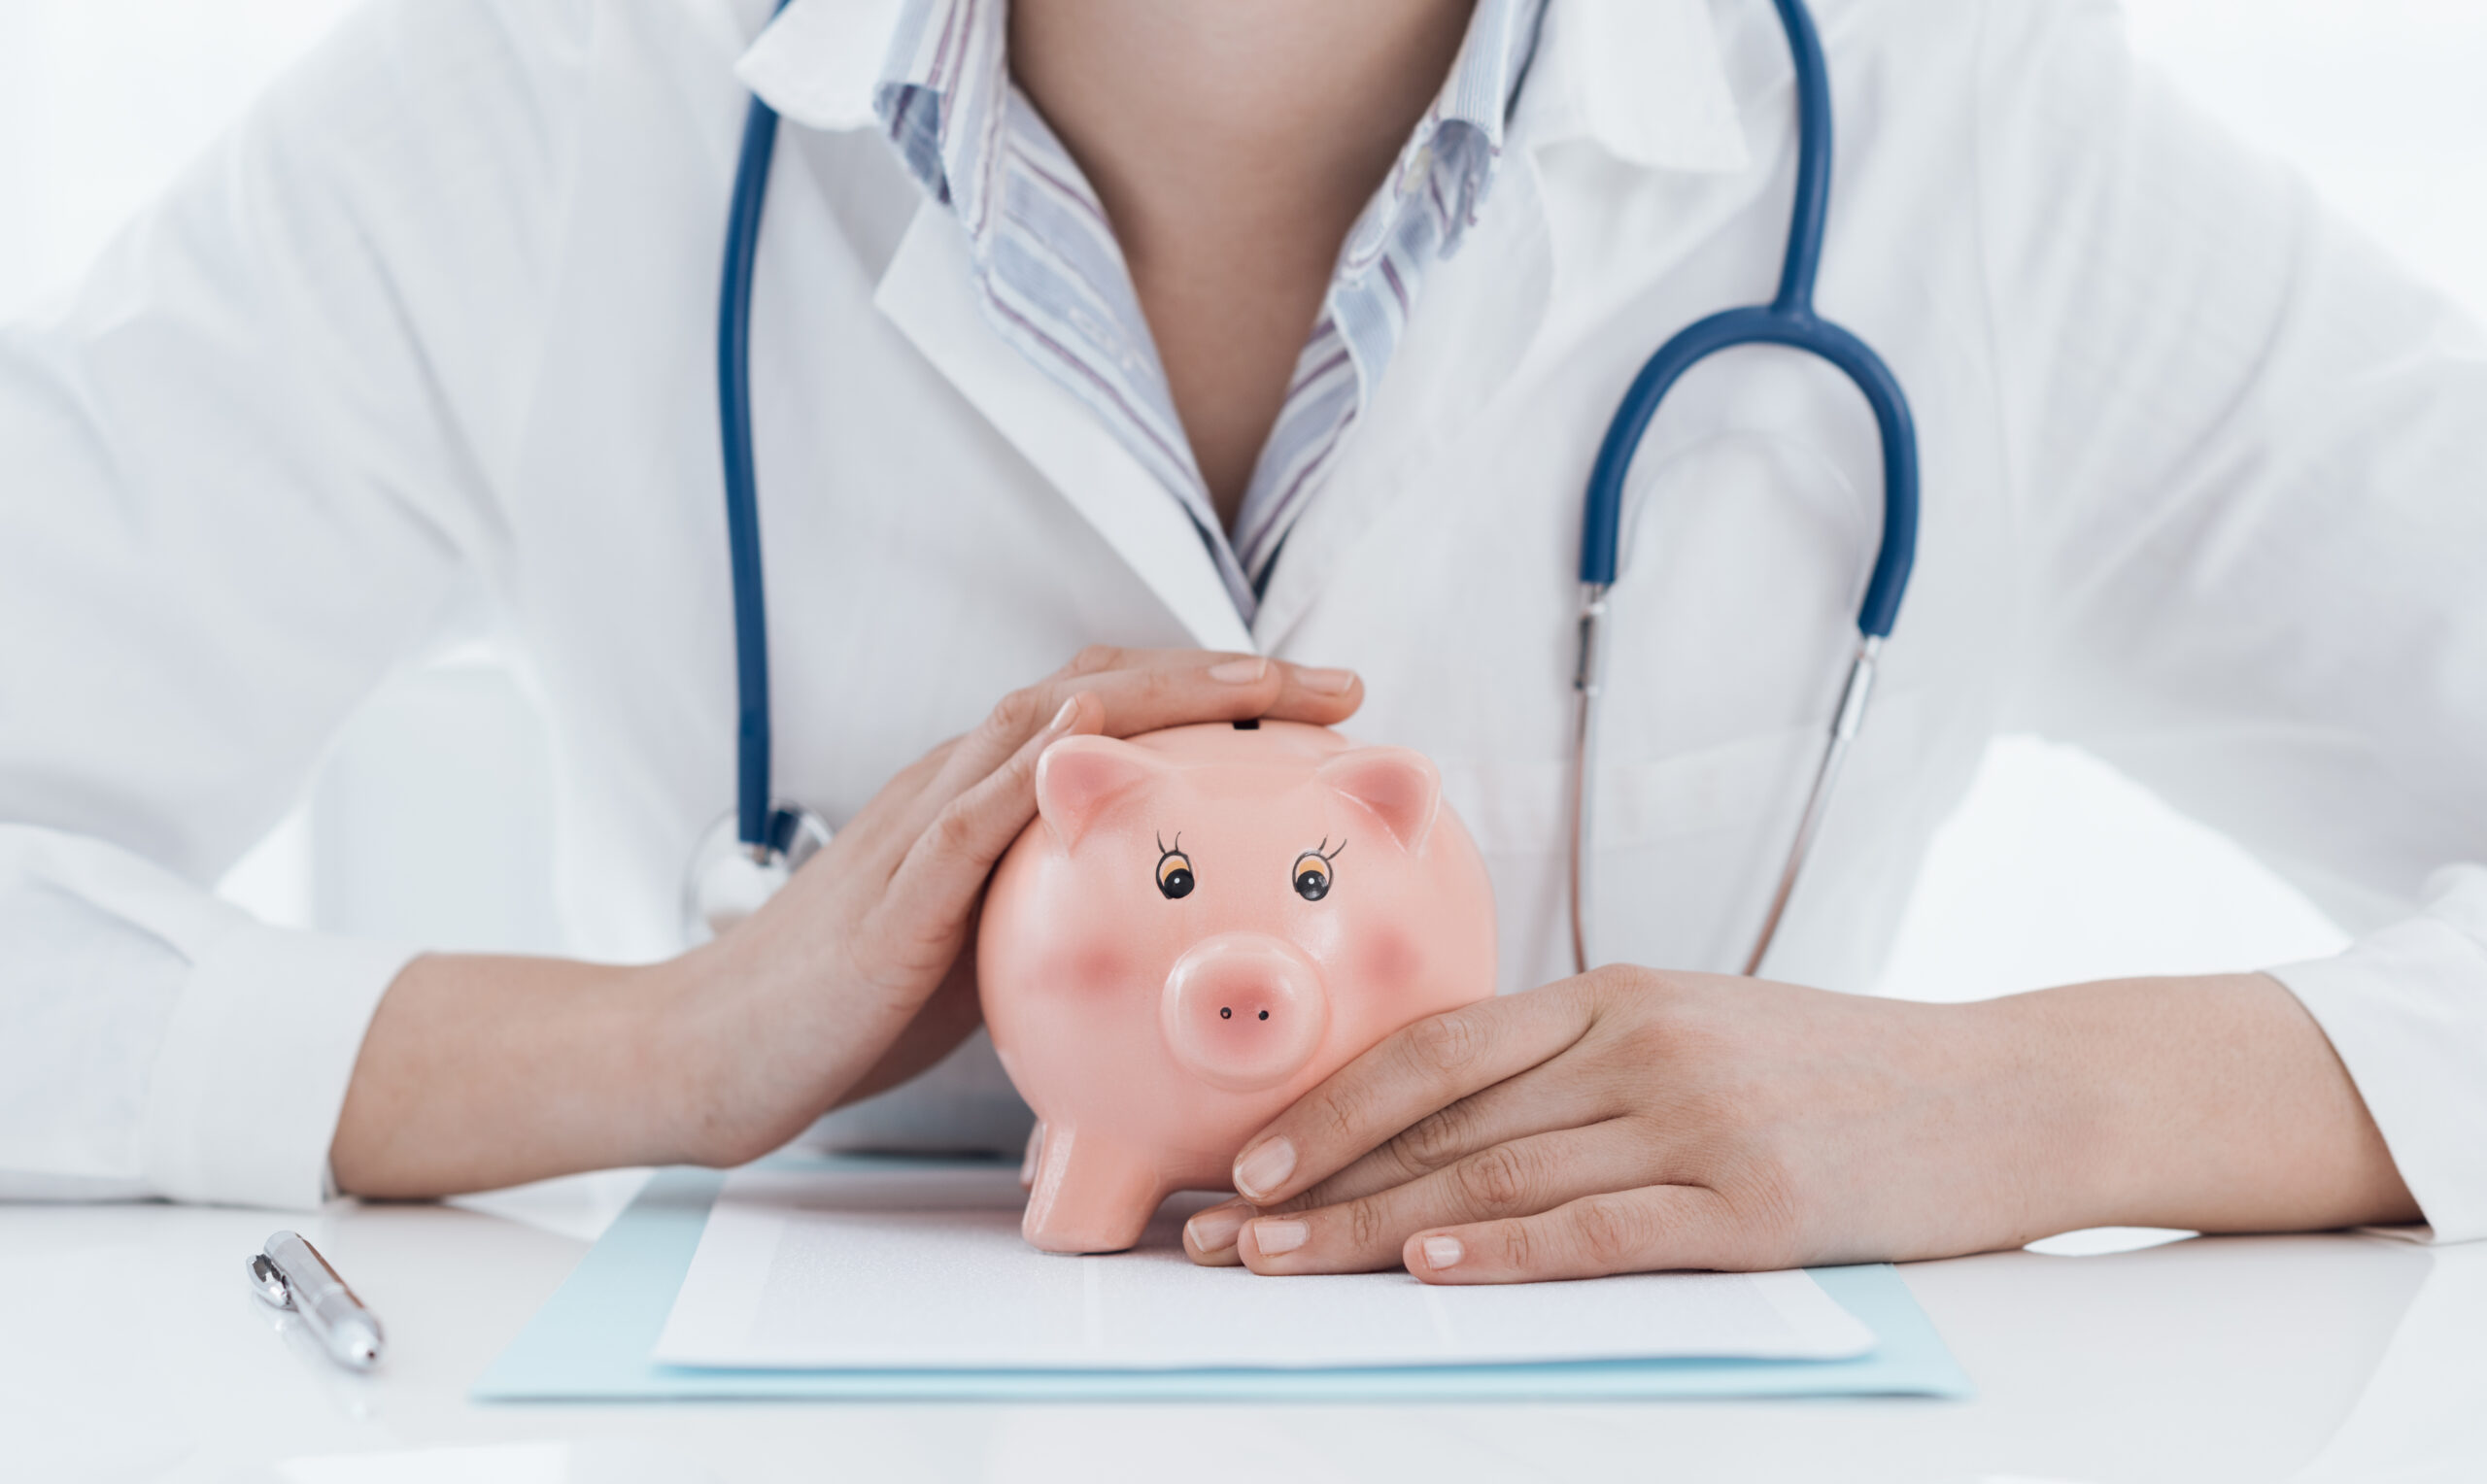 How Does Your Health Insurance Impact Your Finances?